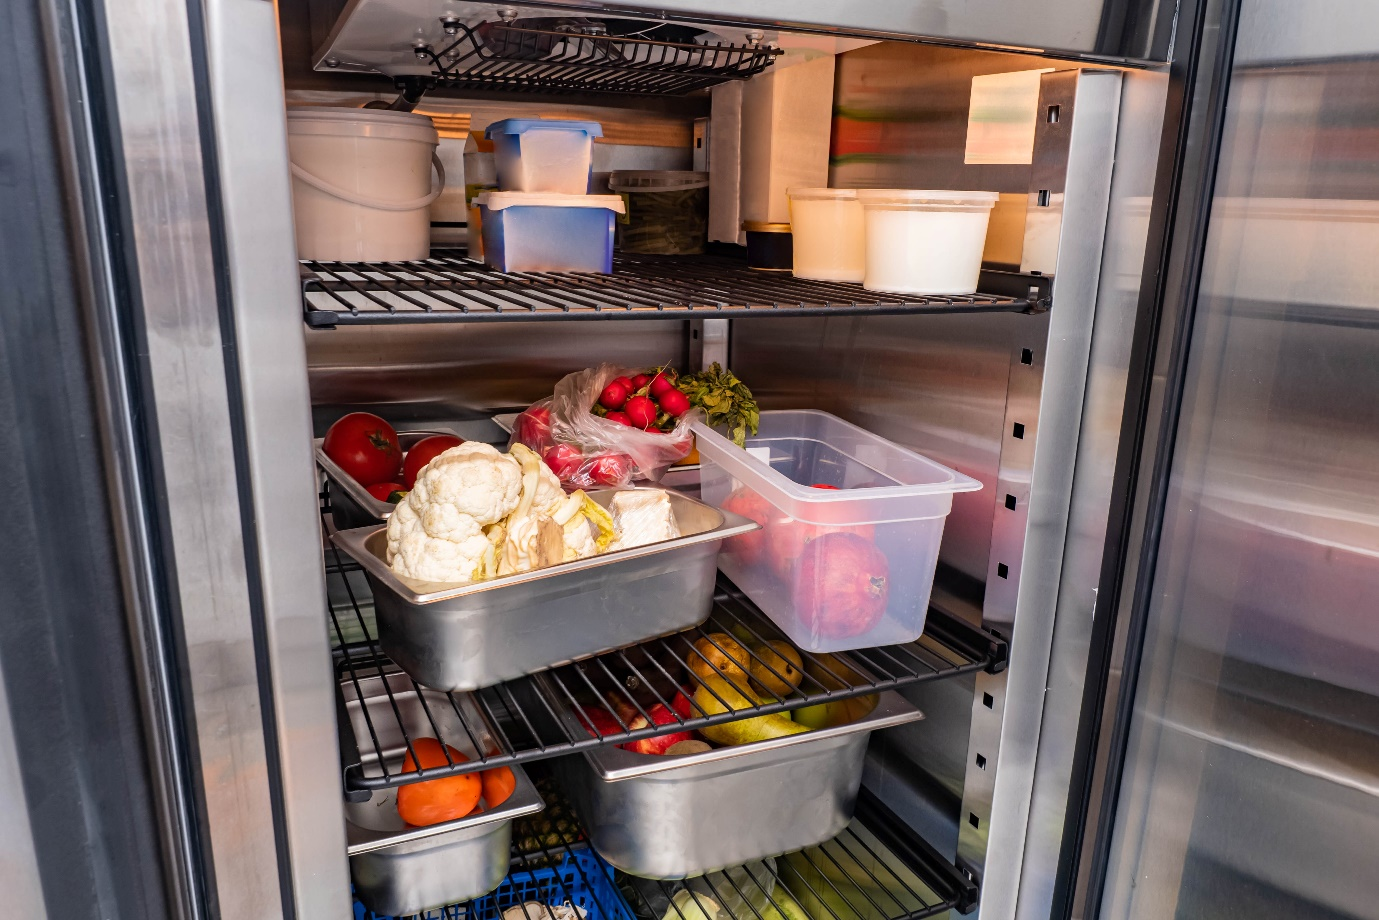 Food organized in a commercial refrigerator